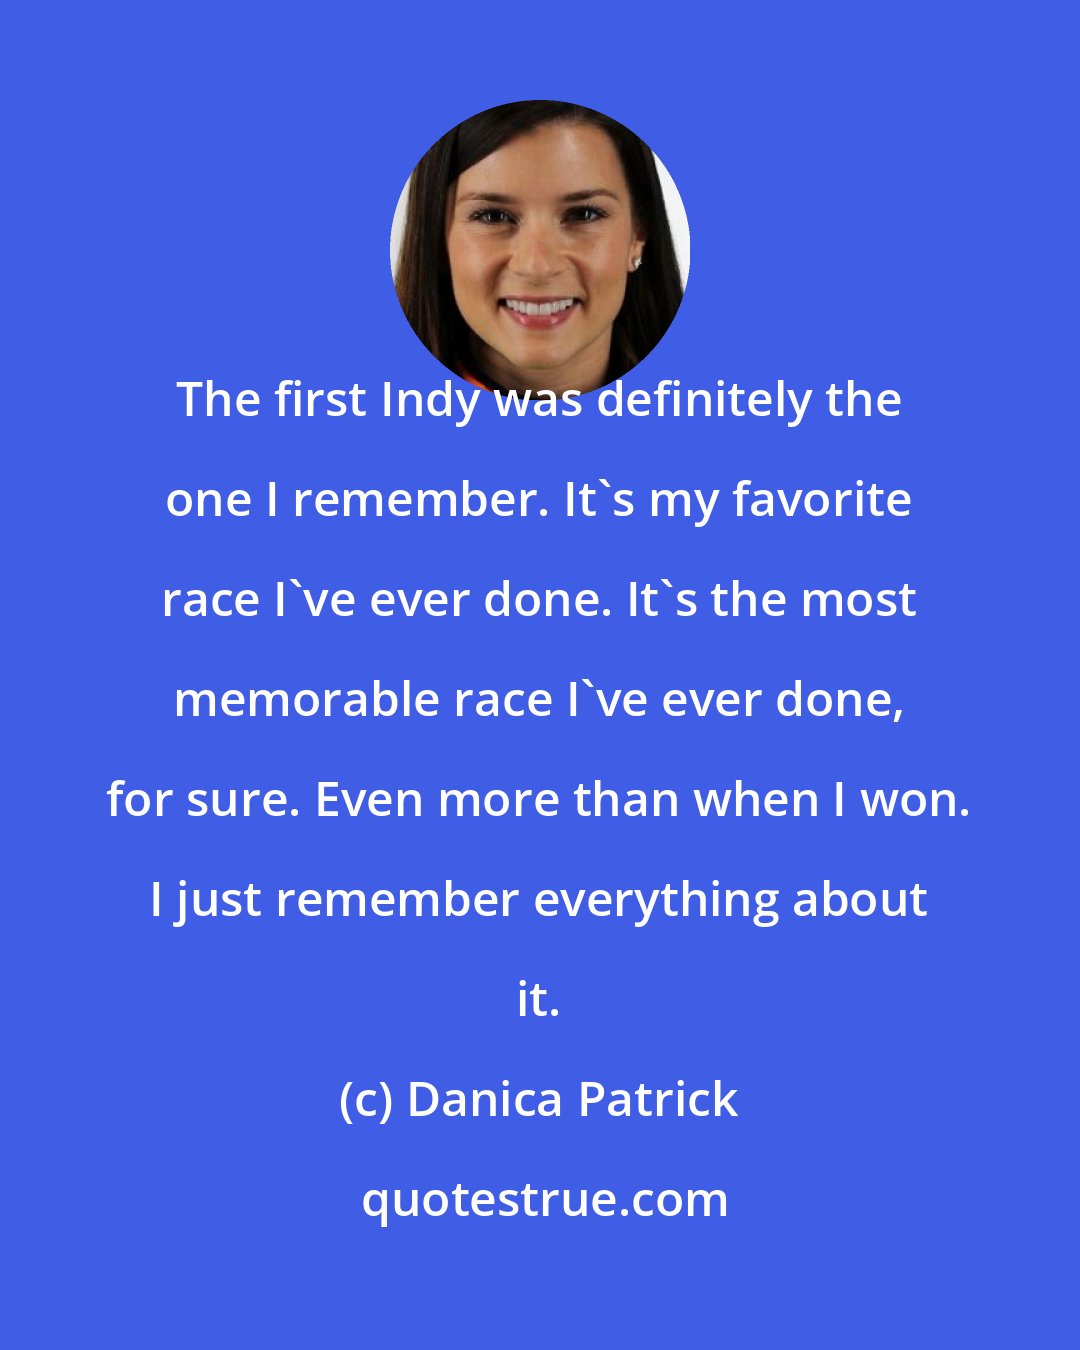 Danica Patrick: The first Indy was definitely the one I remember. It's my favorite race I've ever done. It's the most memorable race I've ever done, for sure. Even more than when I won. I just remember everything about it.